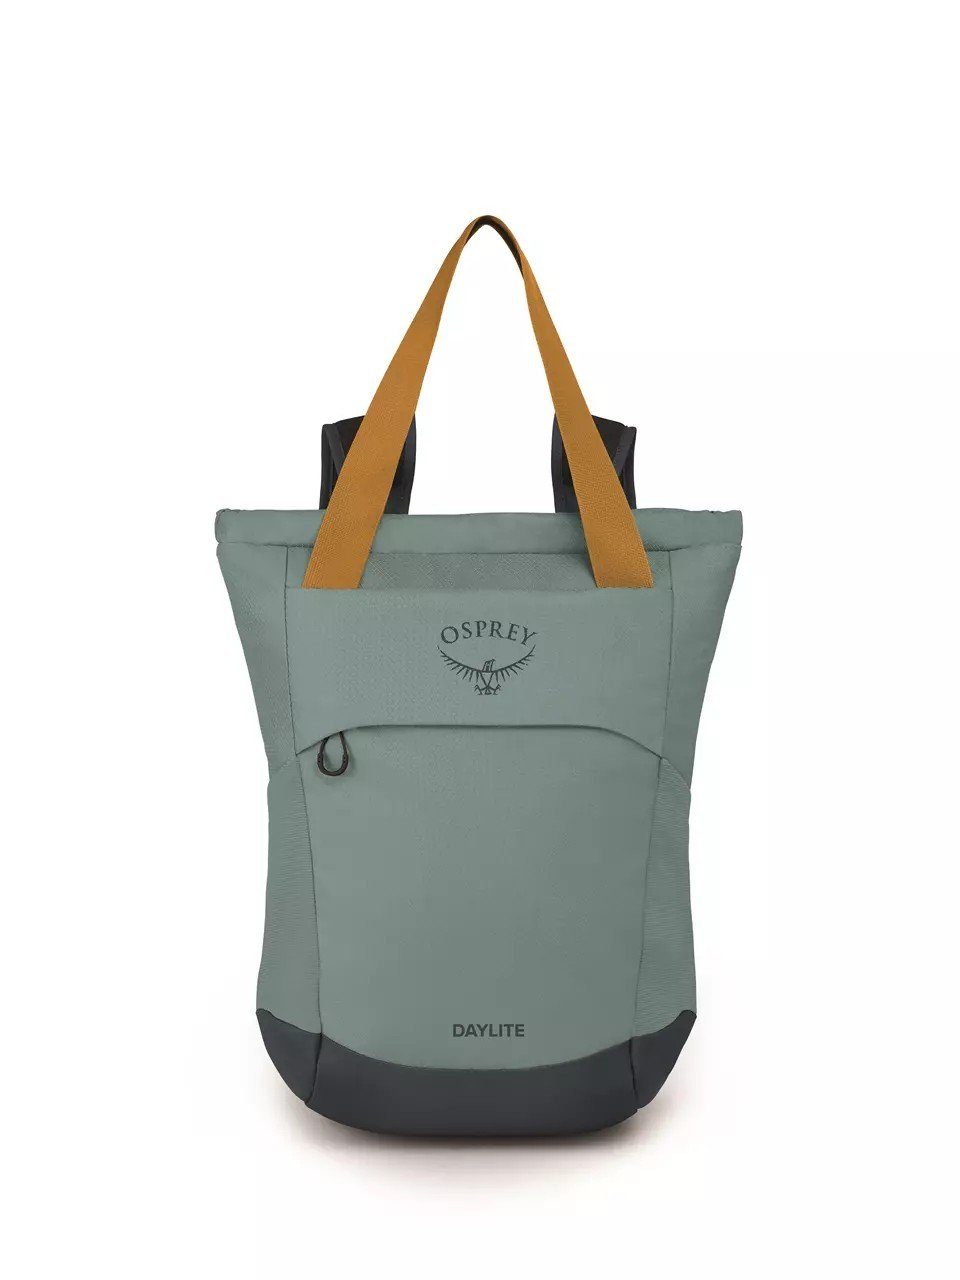 arches Tote Tagesrucksack green night Osprey Pack Daylite